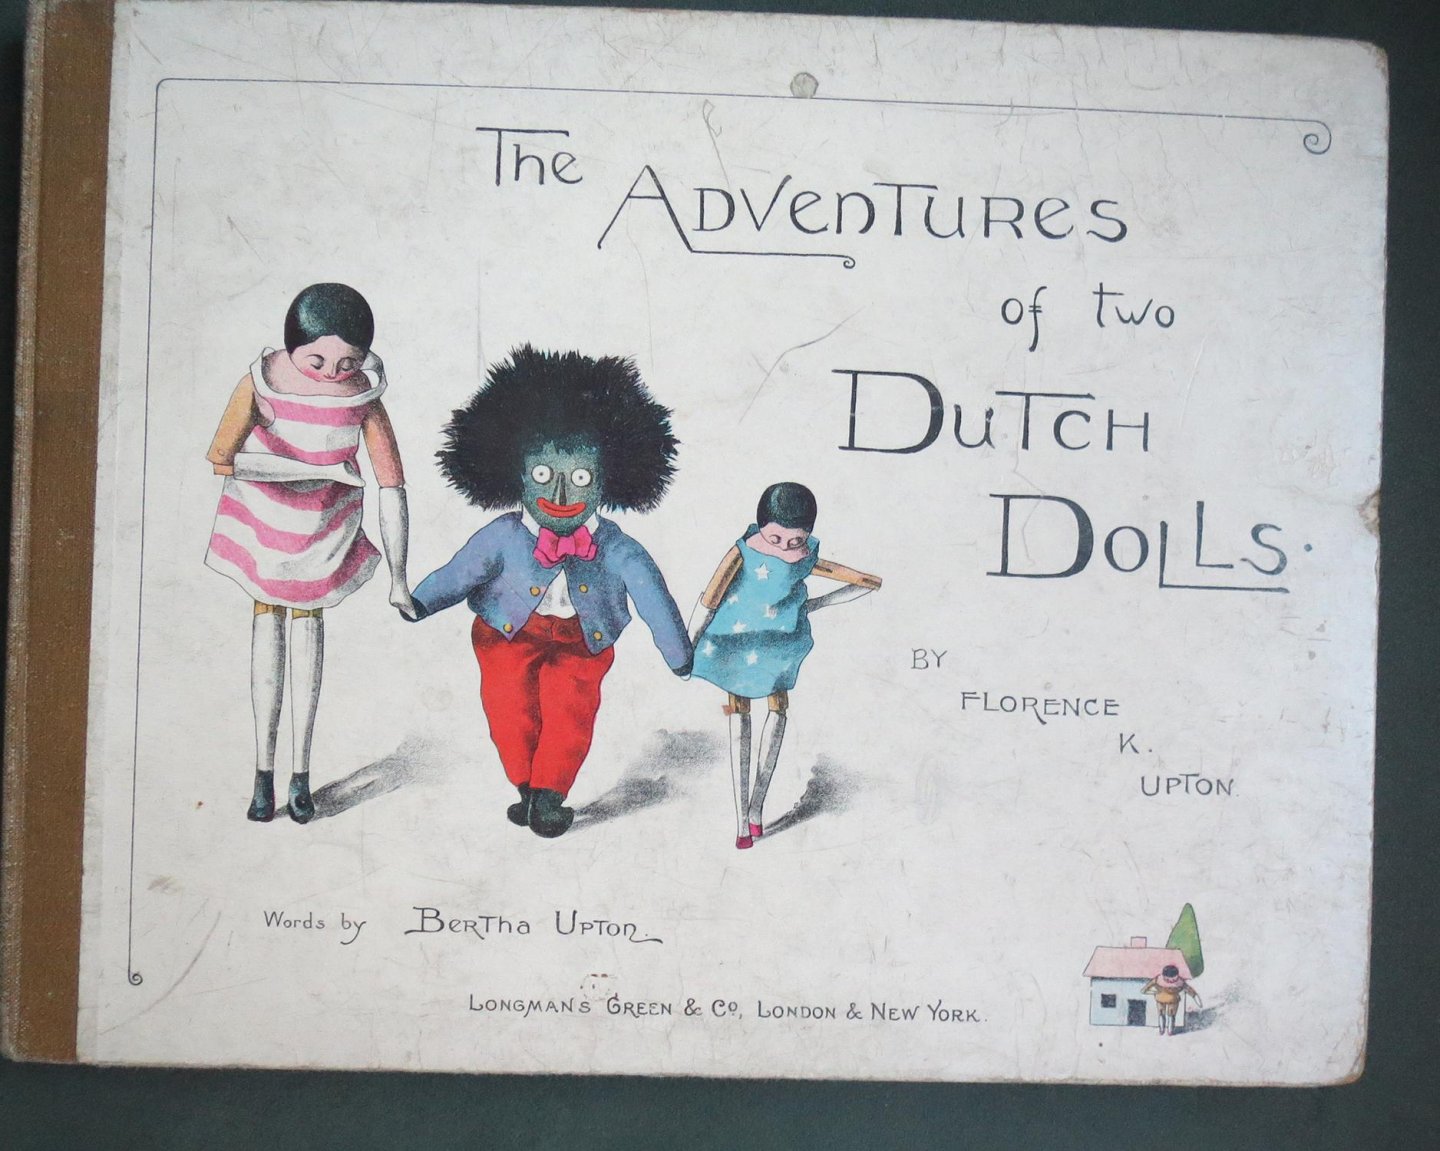 Upton, Bertha and Upton, Florence K. (ills.) - The Adventures of two Dutch Dolls and a "Golliwogg"